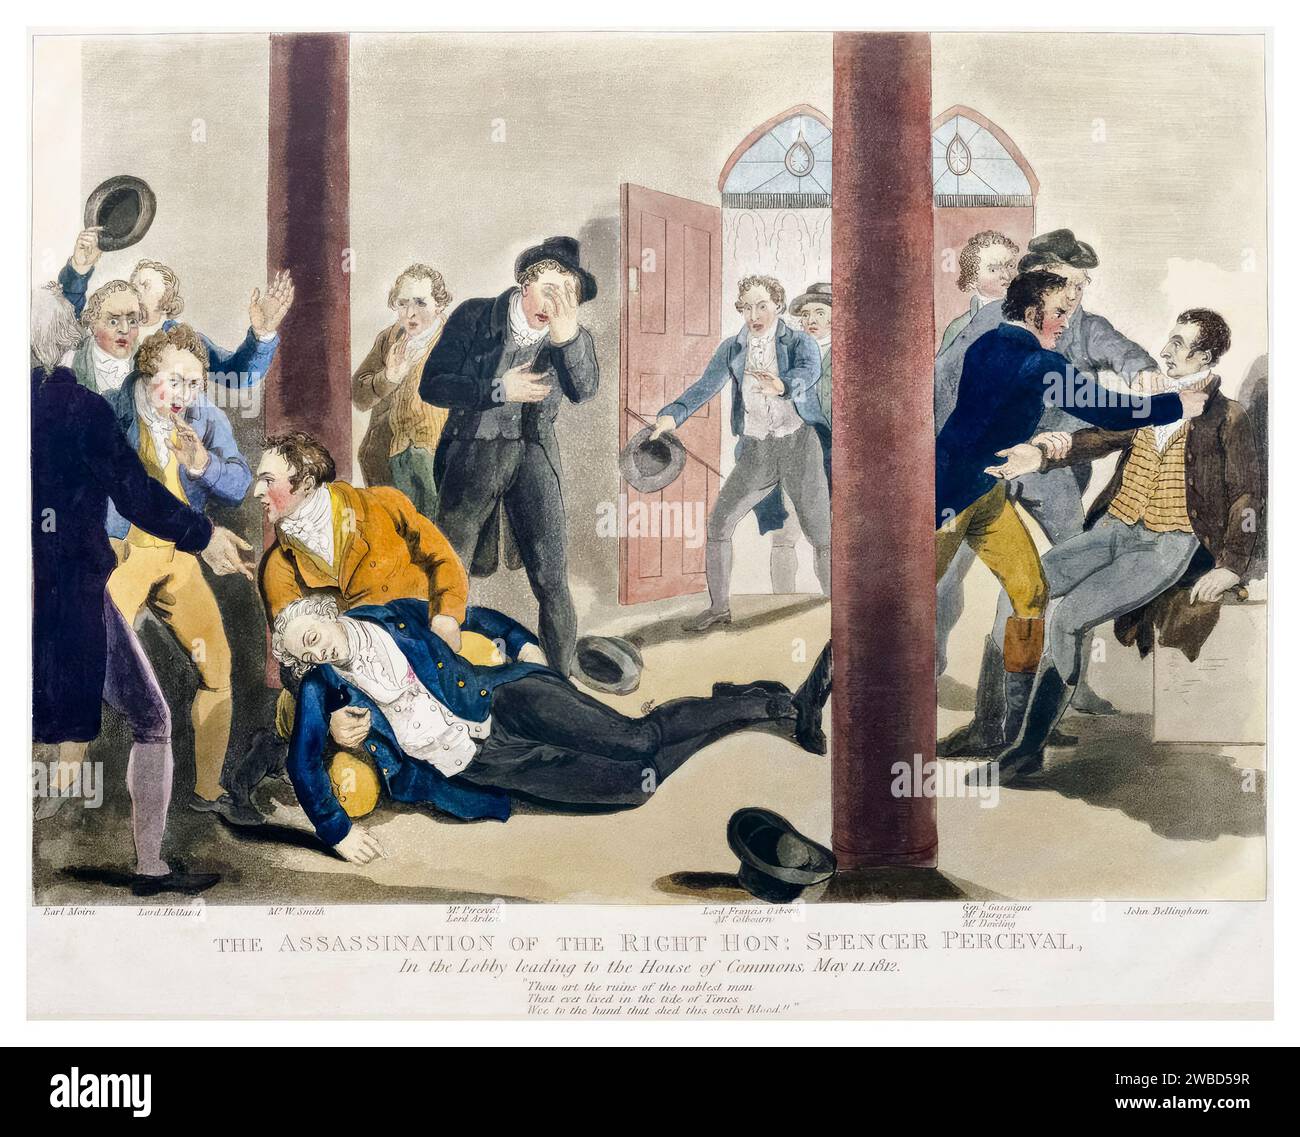 British Prime Minister, Spencer Perceval (1762-1812) is assassinated by John Bellingham in the lobby of the House of Commons on 11th May 1812, hand coloured print by John Heaviside Clark, 1812 Stock Photo